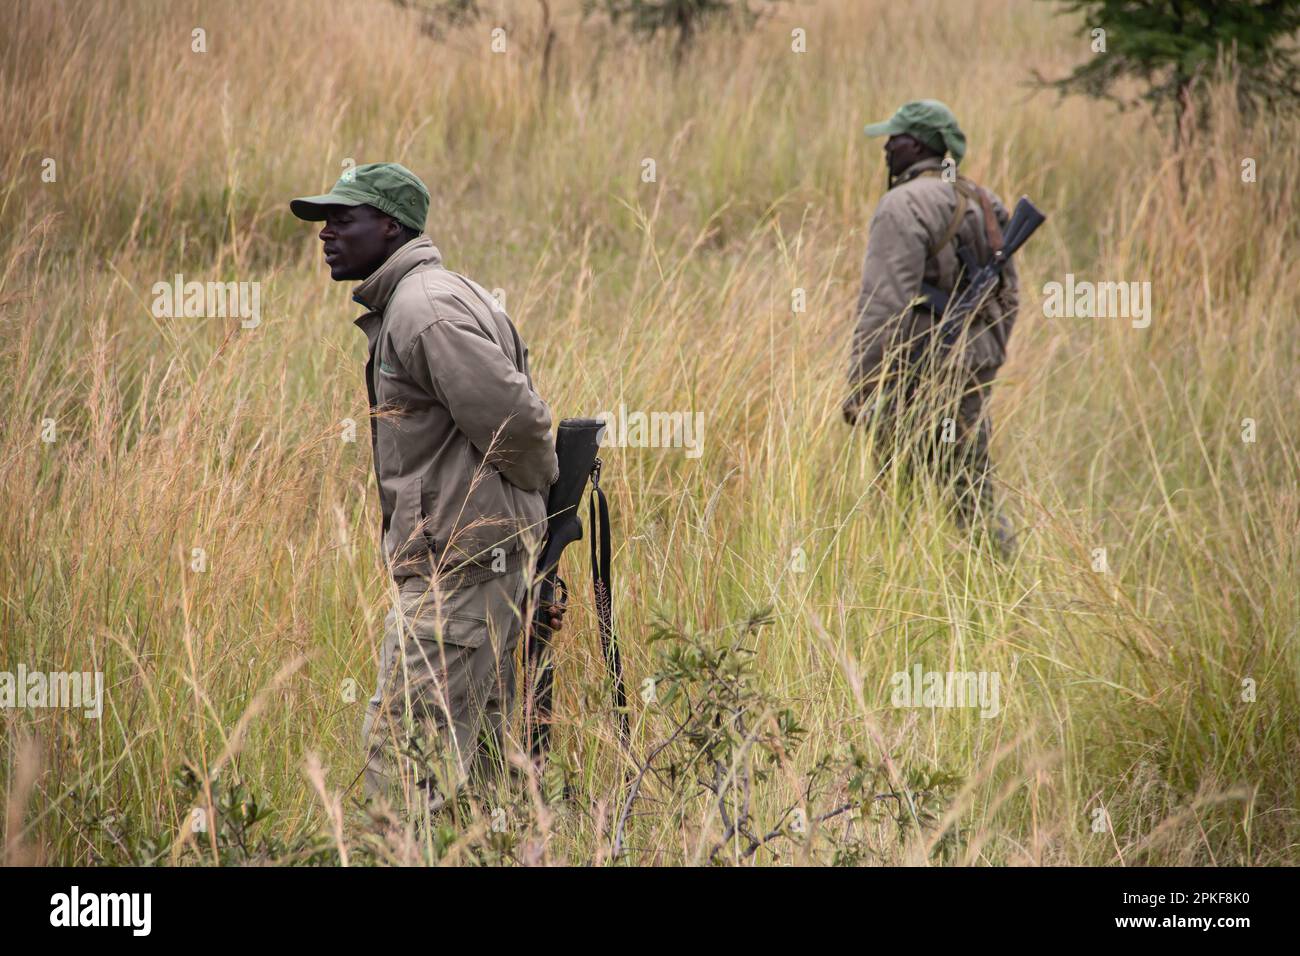 Rangers armed with guns in animal conservation park in Zimbabwe, in Imire Rhino and Wildlife Conservancy Stock Photo